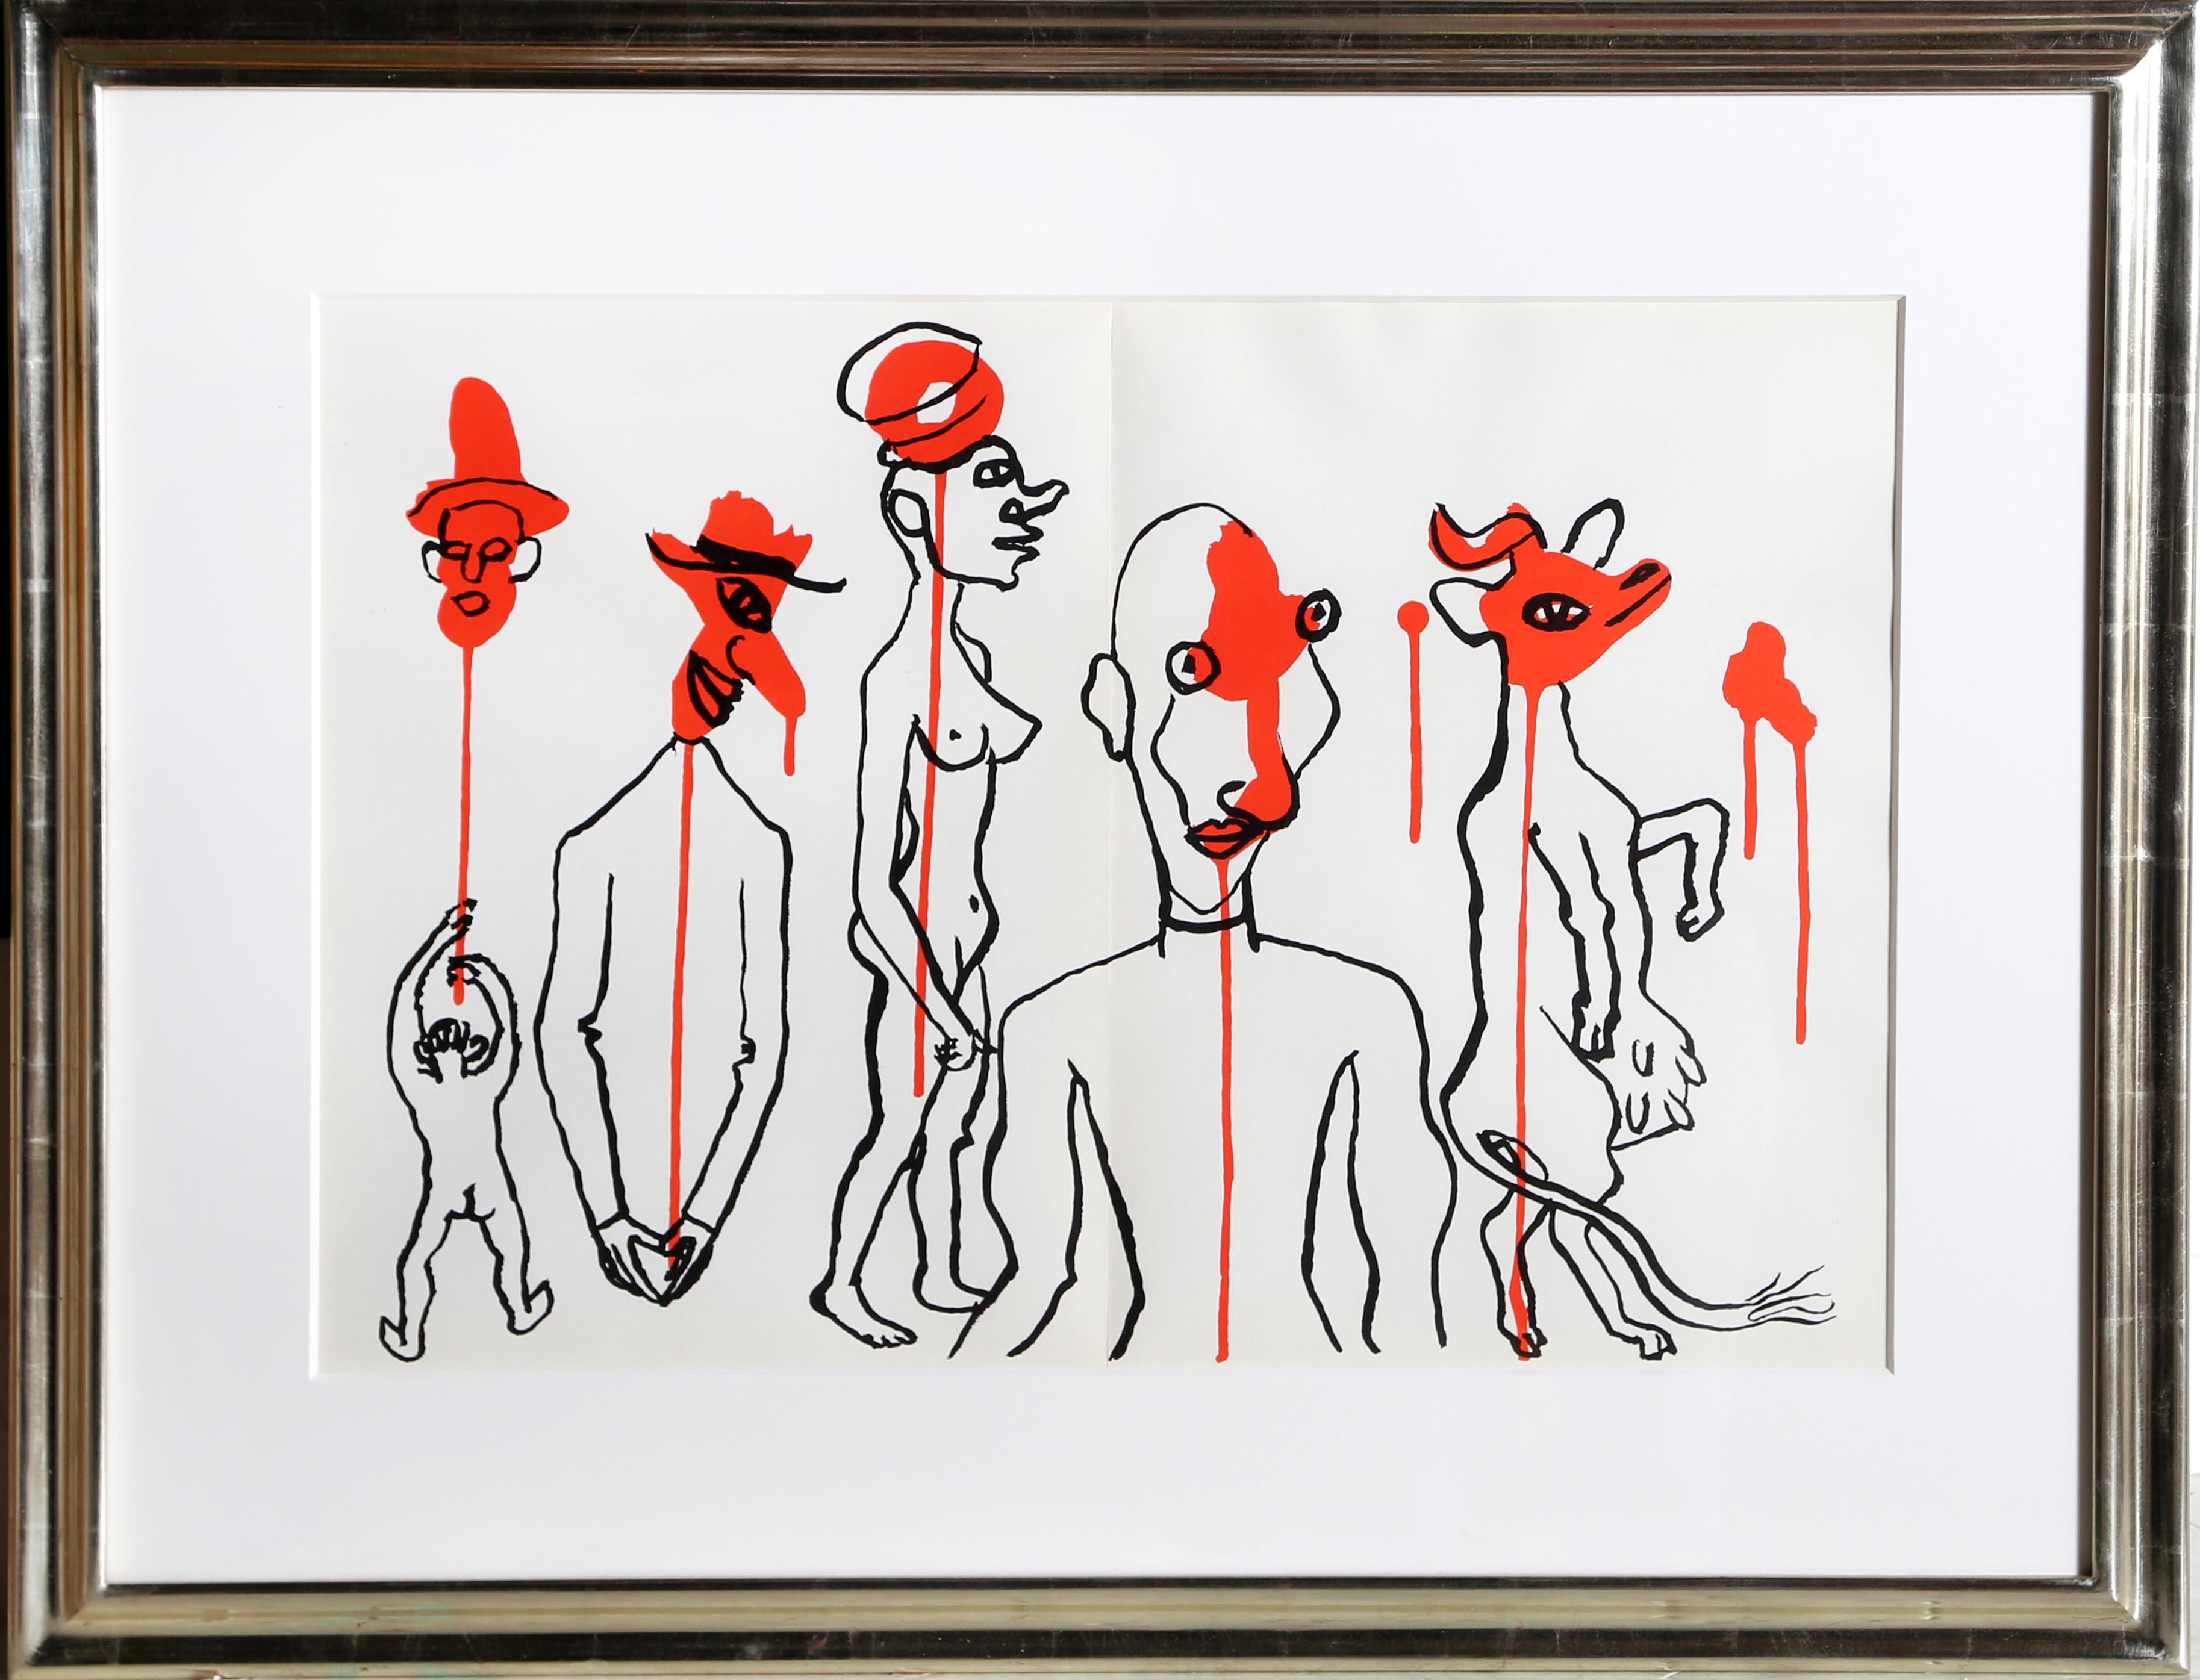 Artist: Alexander Calder, American (1898 - 1976)
Title: Les Gueules Degoulinantes from Derriere Le Miroir
Year: 1966
Medium: Lithograph
Size: 15 x 22 inches
Frame Size: 23 x 30 inches

printed and published by Maeght, Paris